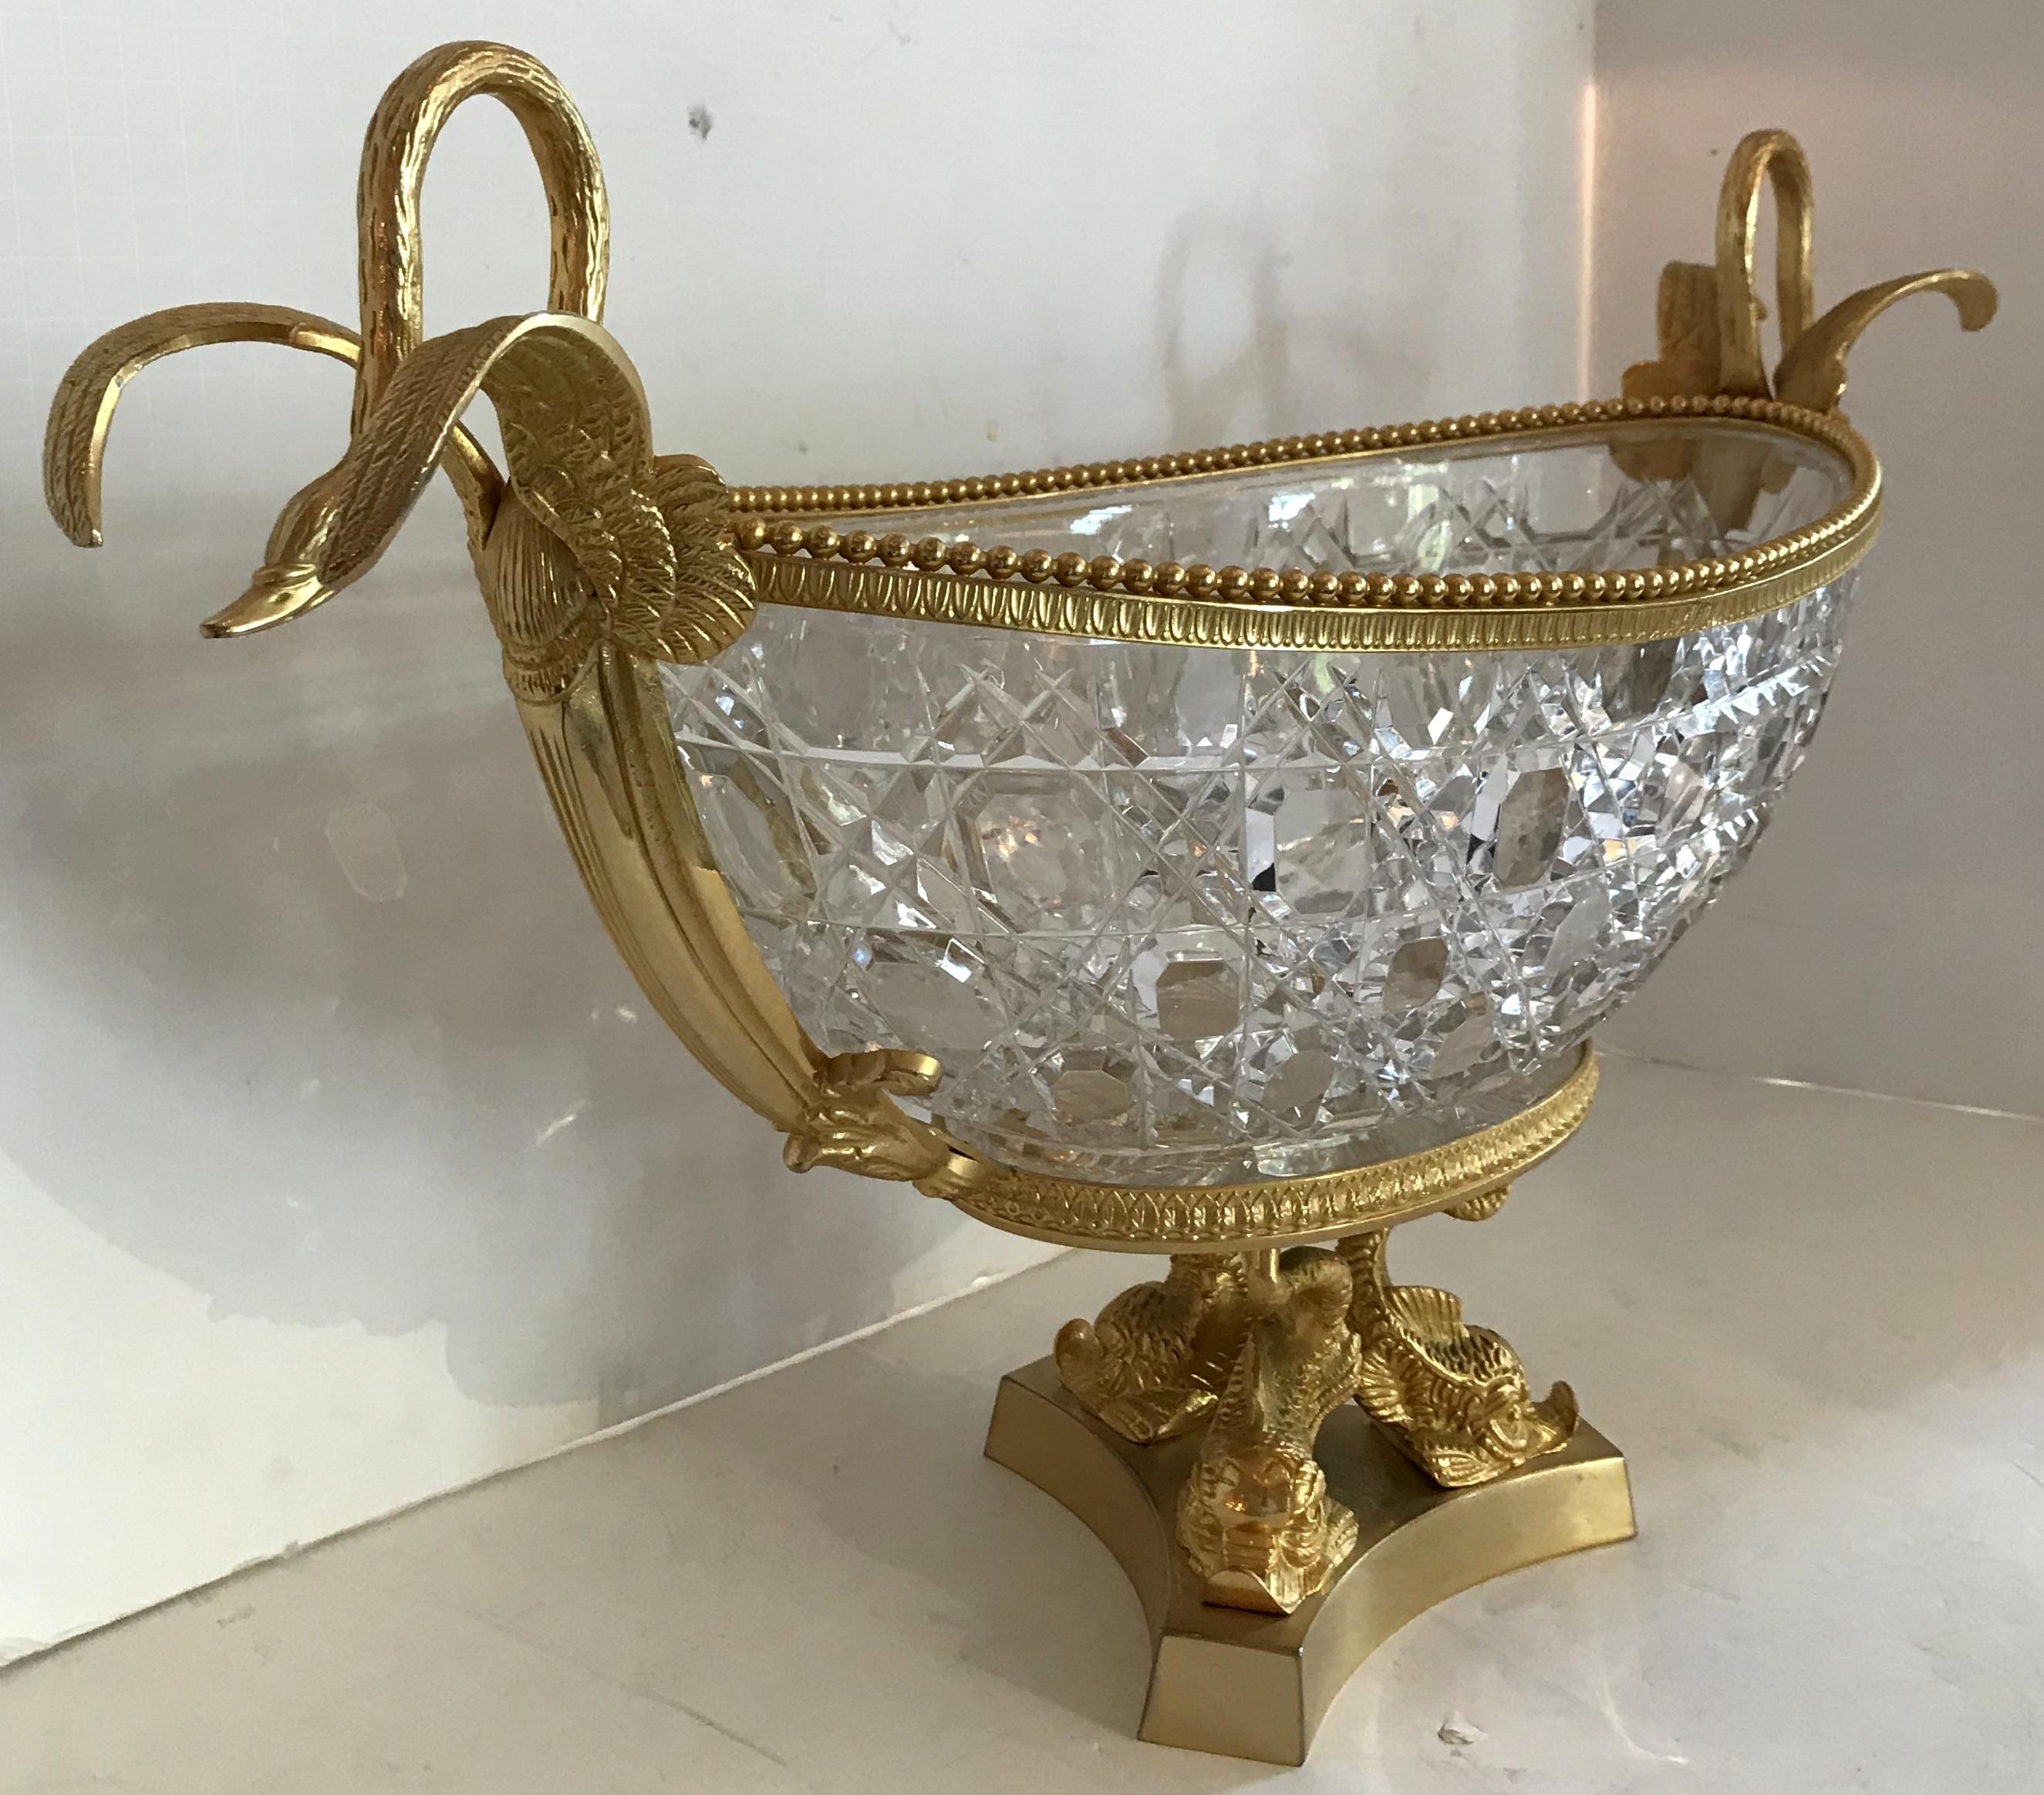 A wonderful large French doré´ bronze centerpiece with three dolphins on the pedestal and two lovely swans in flight on each side. The faceted fine cut crystal insert with star burst bottom add to the elegance of this impressive centerpiece. Etched